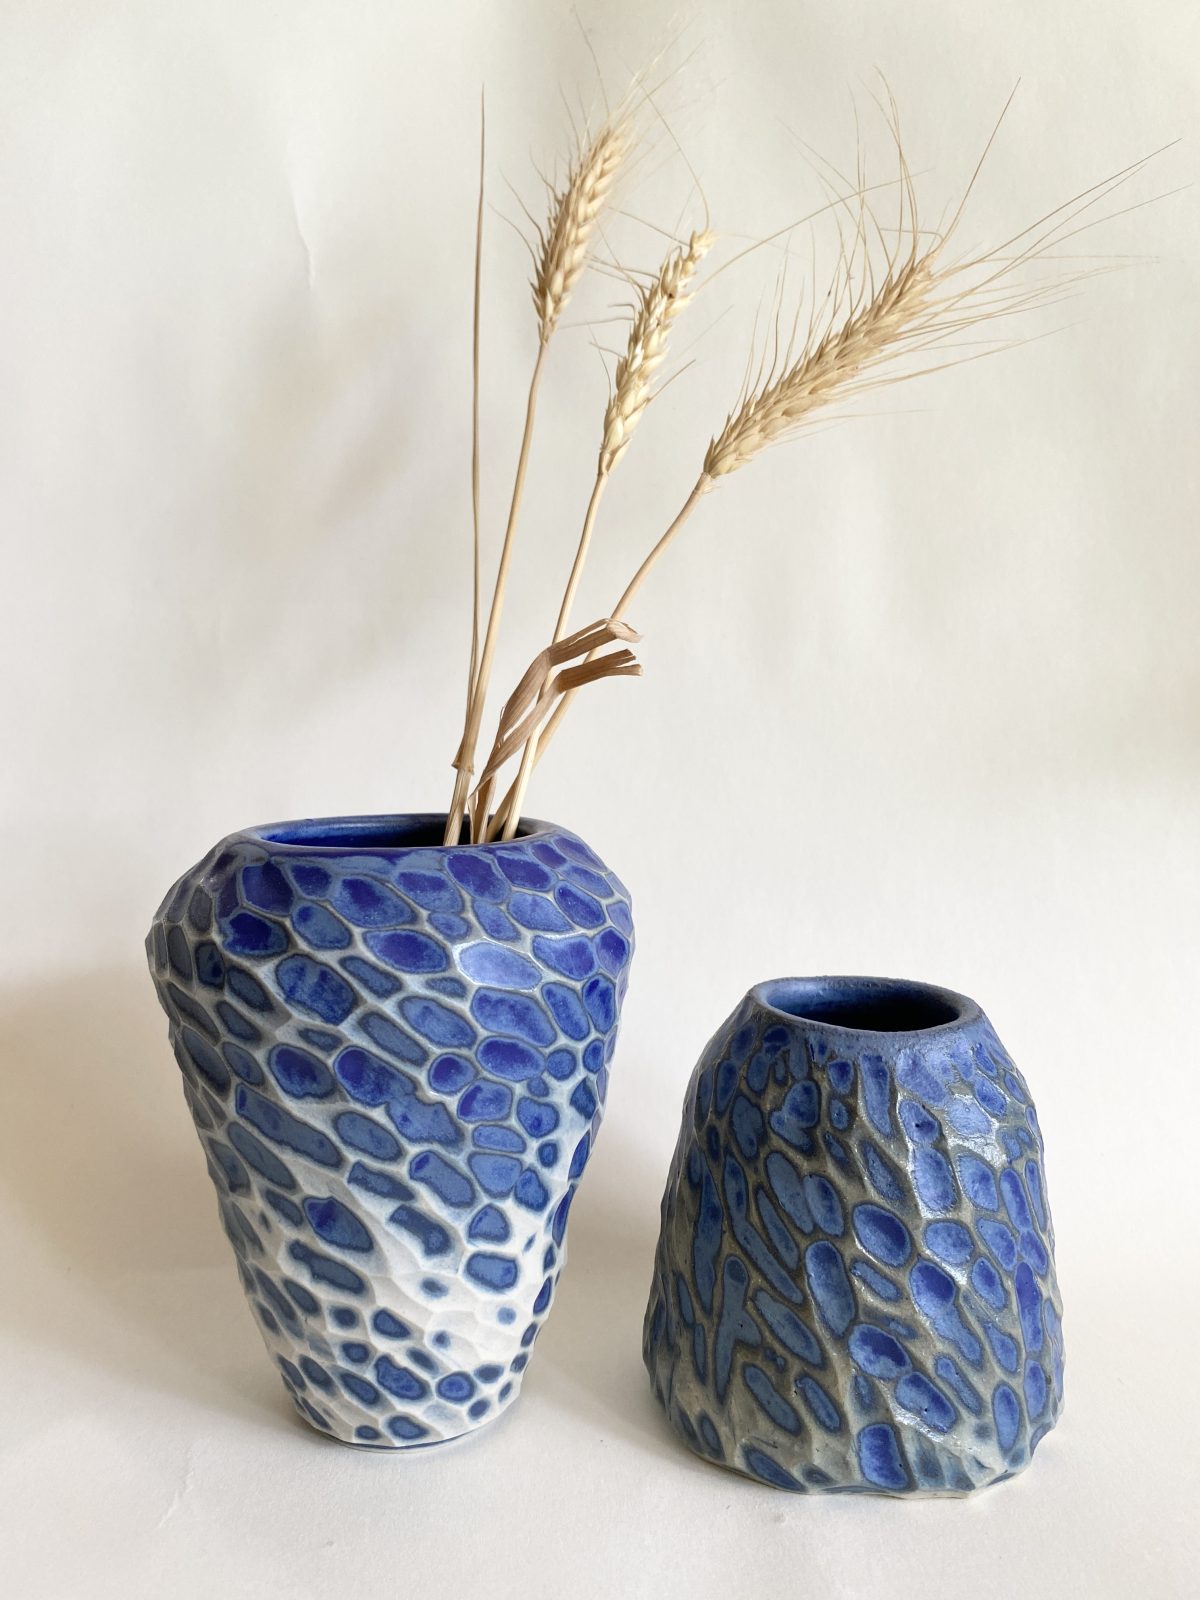 Cermaic vases from my current body of work exploring time and movement through observing shorelines